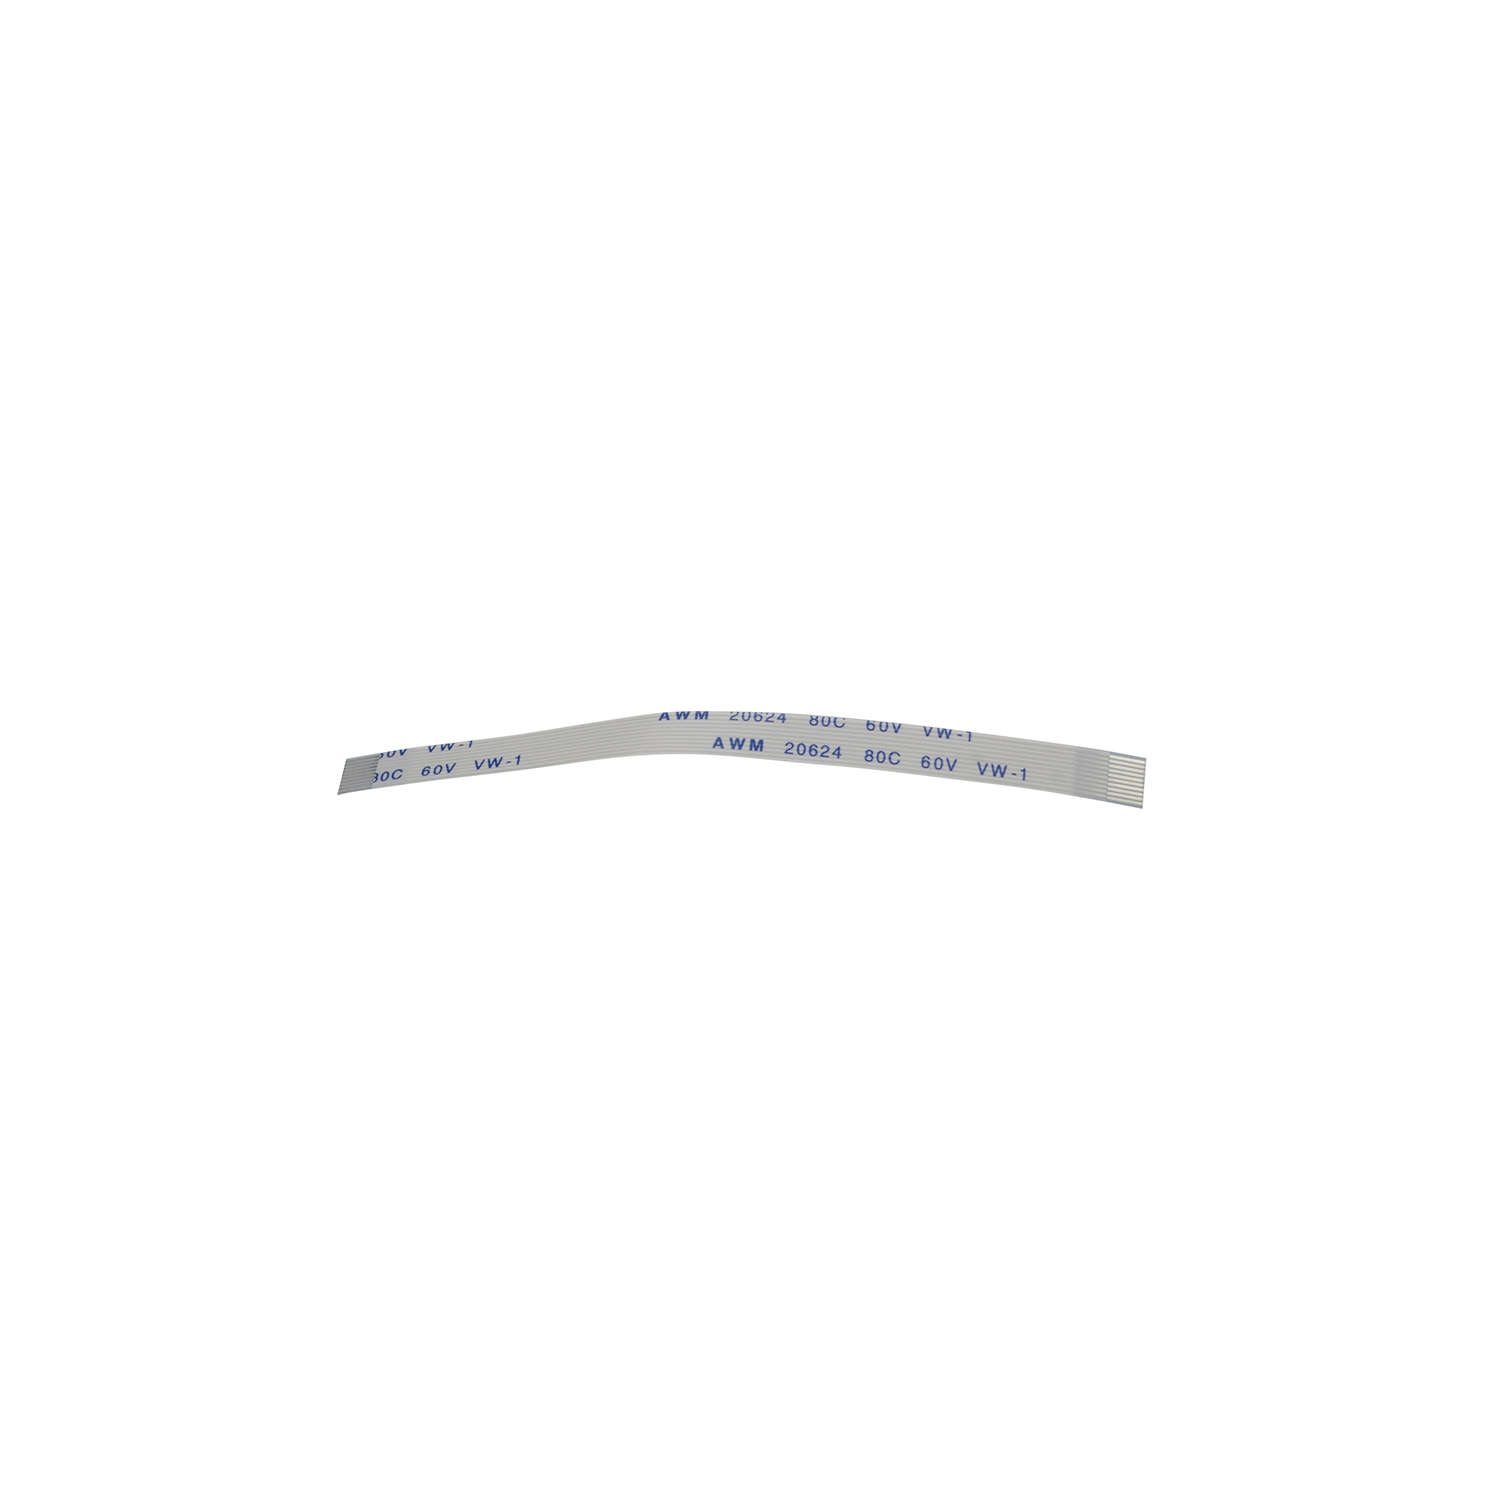 PS3 Slim Power Control Board Cable - Ribbon Cable Replacement Ten Pin